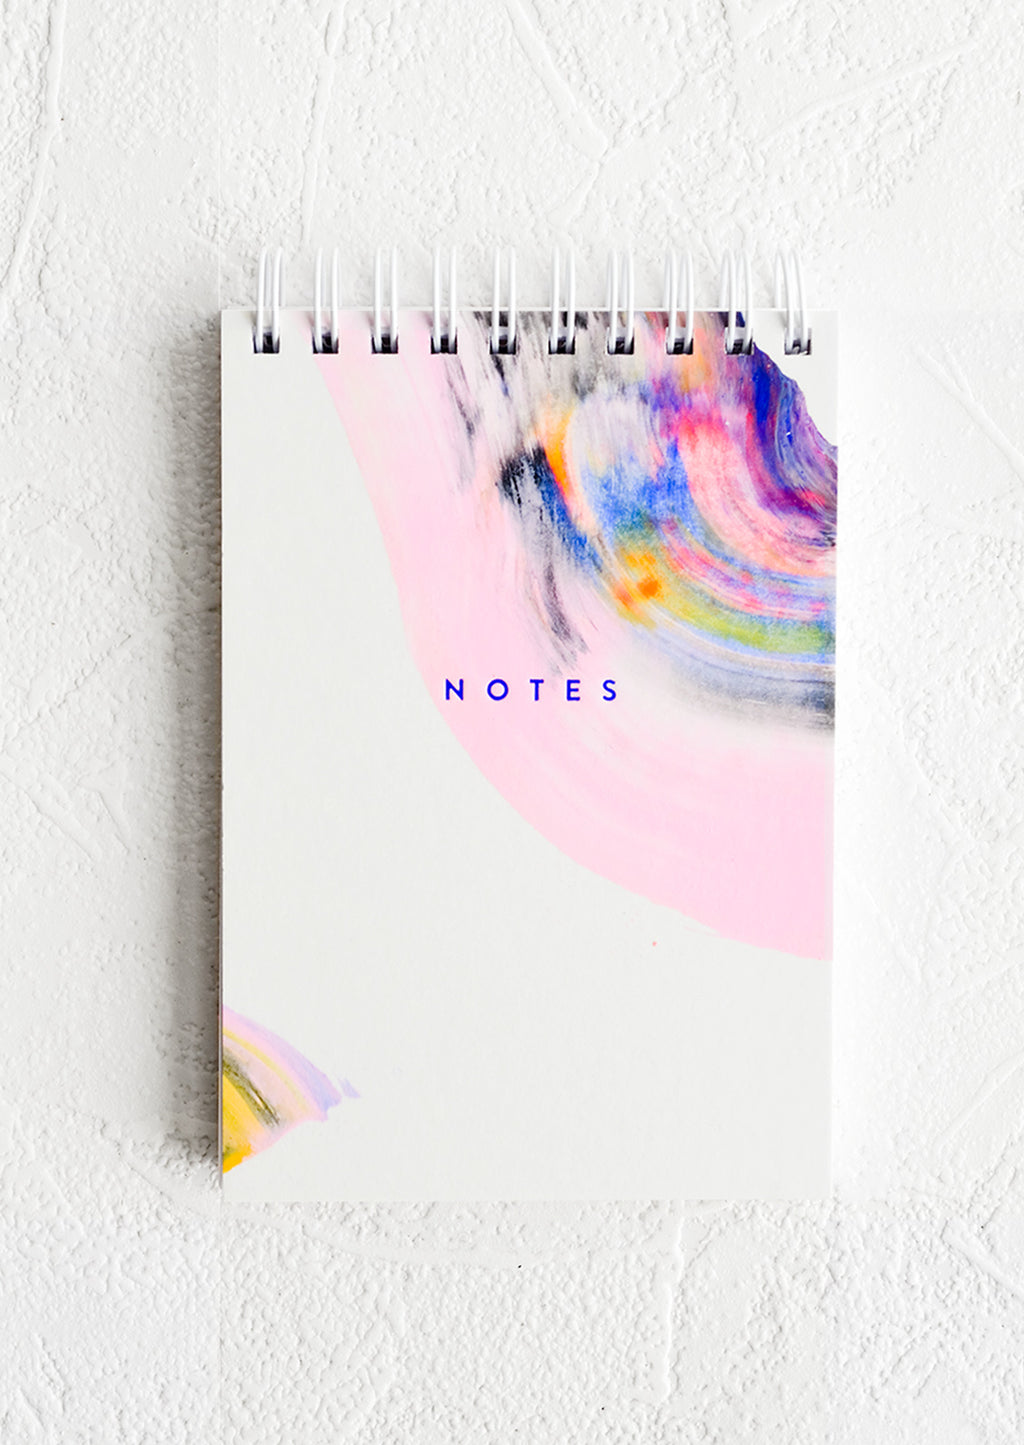 Notepad (Unruled): A small white spiral bound notepad with rainbow swirl painted cover and "NOTES" on front.